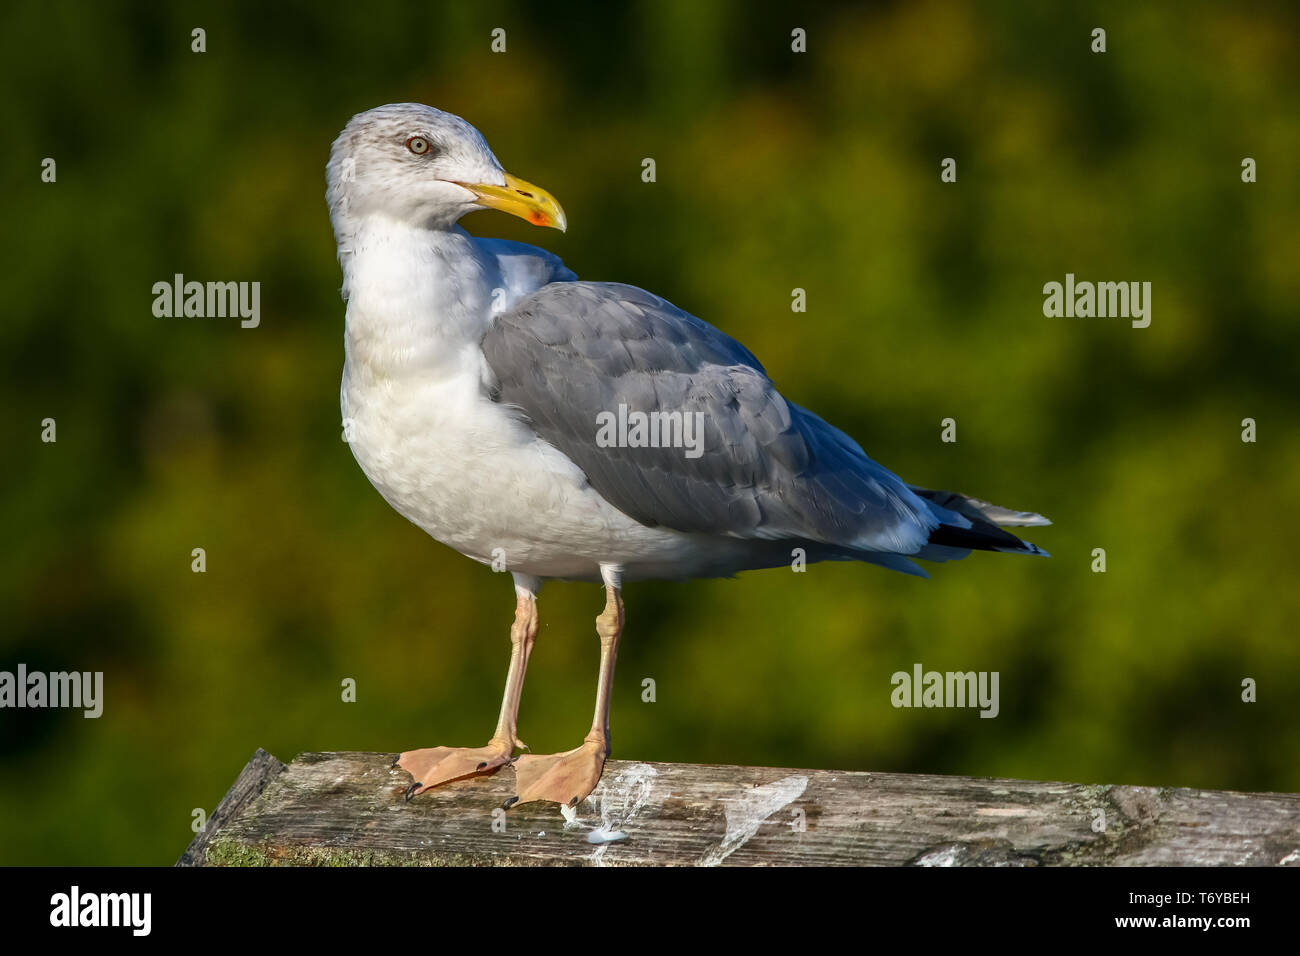 Seagull standing against natural green background. Stock Photo